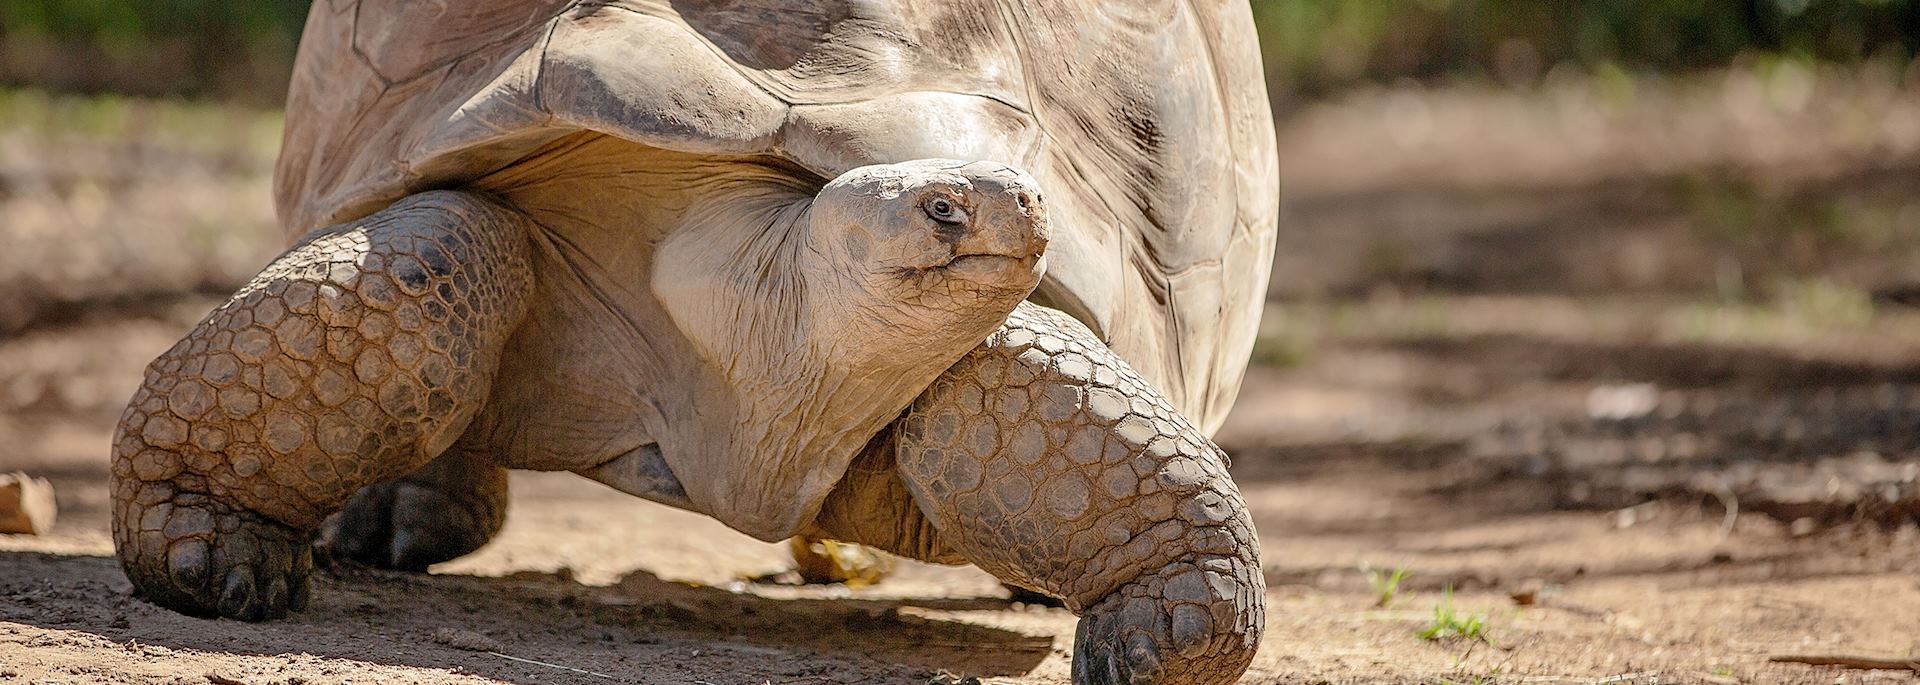 Giant tortoise in the Galapagos